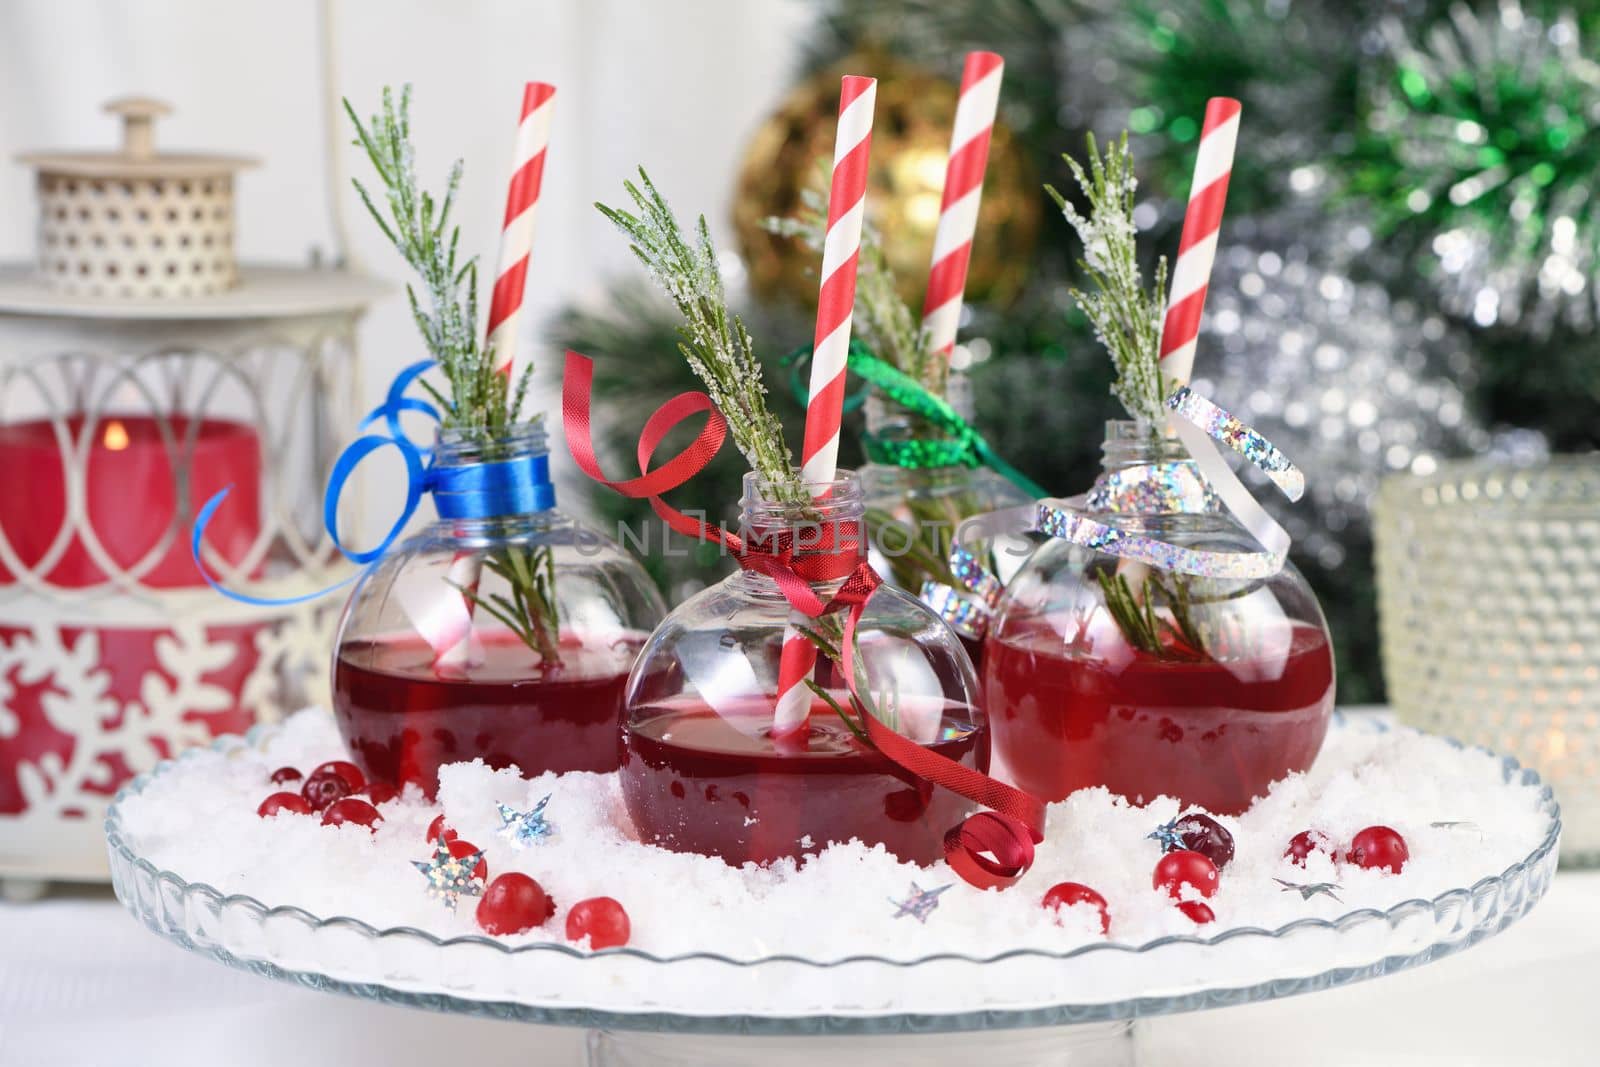 Gin with tonic and cranberry juice. The cocktail is full of festive Christmas flavors. Served in transparent bowls with a branch of rosemary.